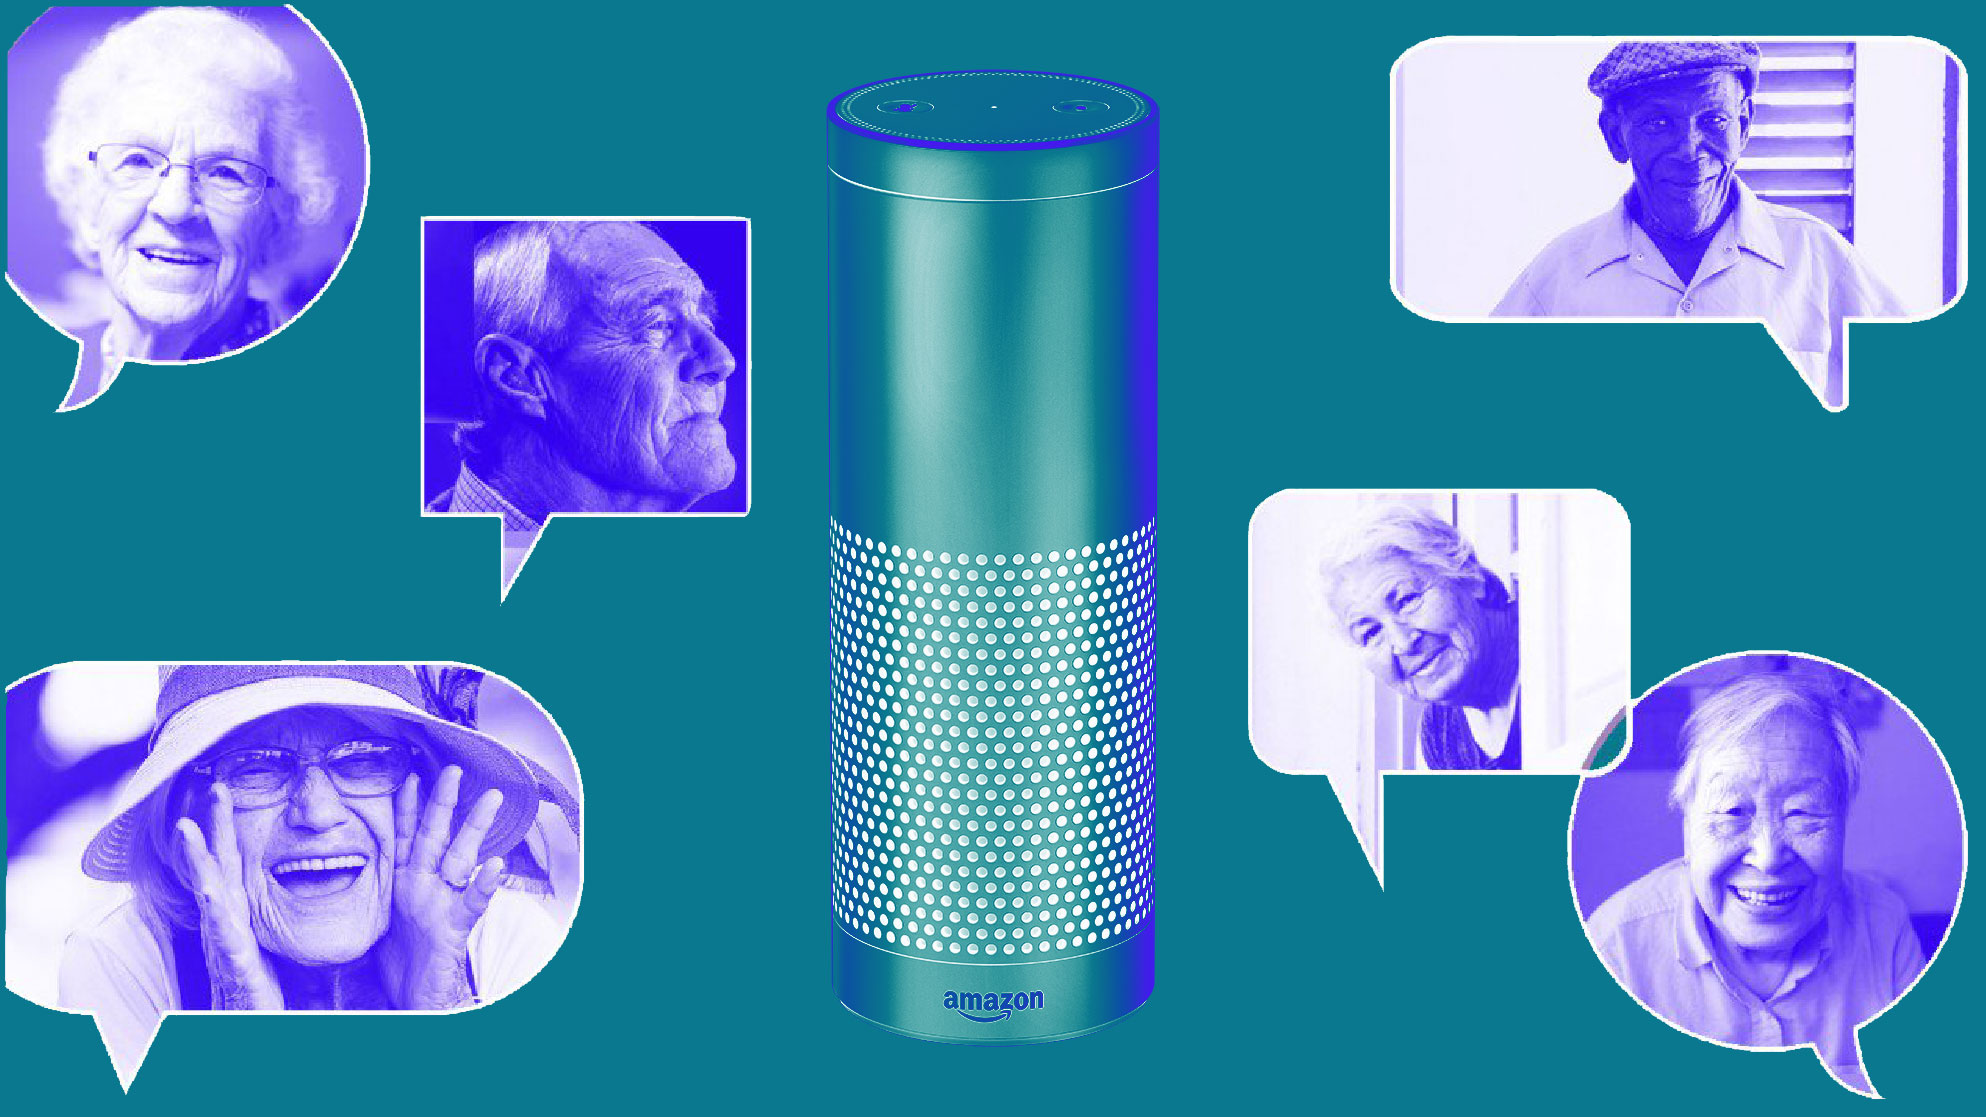 Photo illustration showing people in speach bubbles around a smart speaker